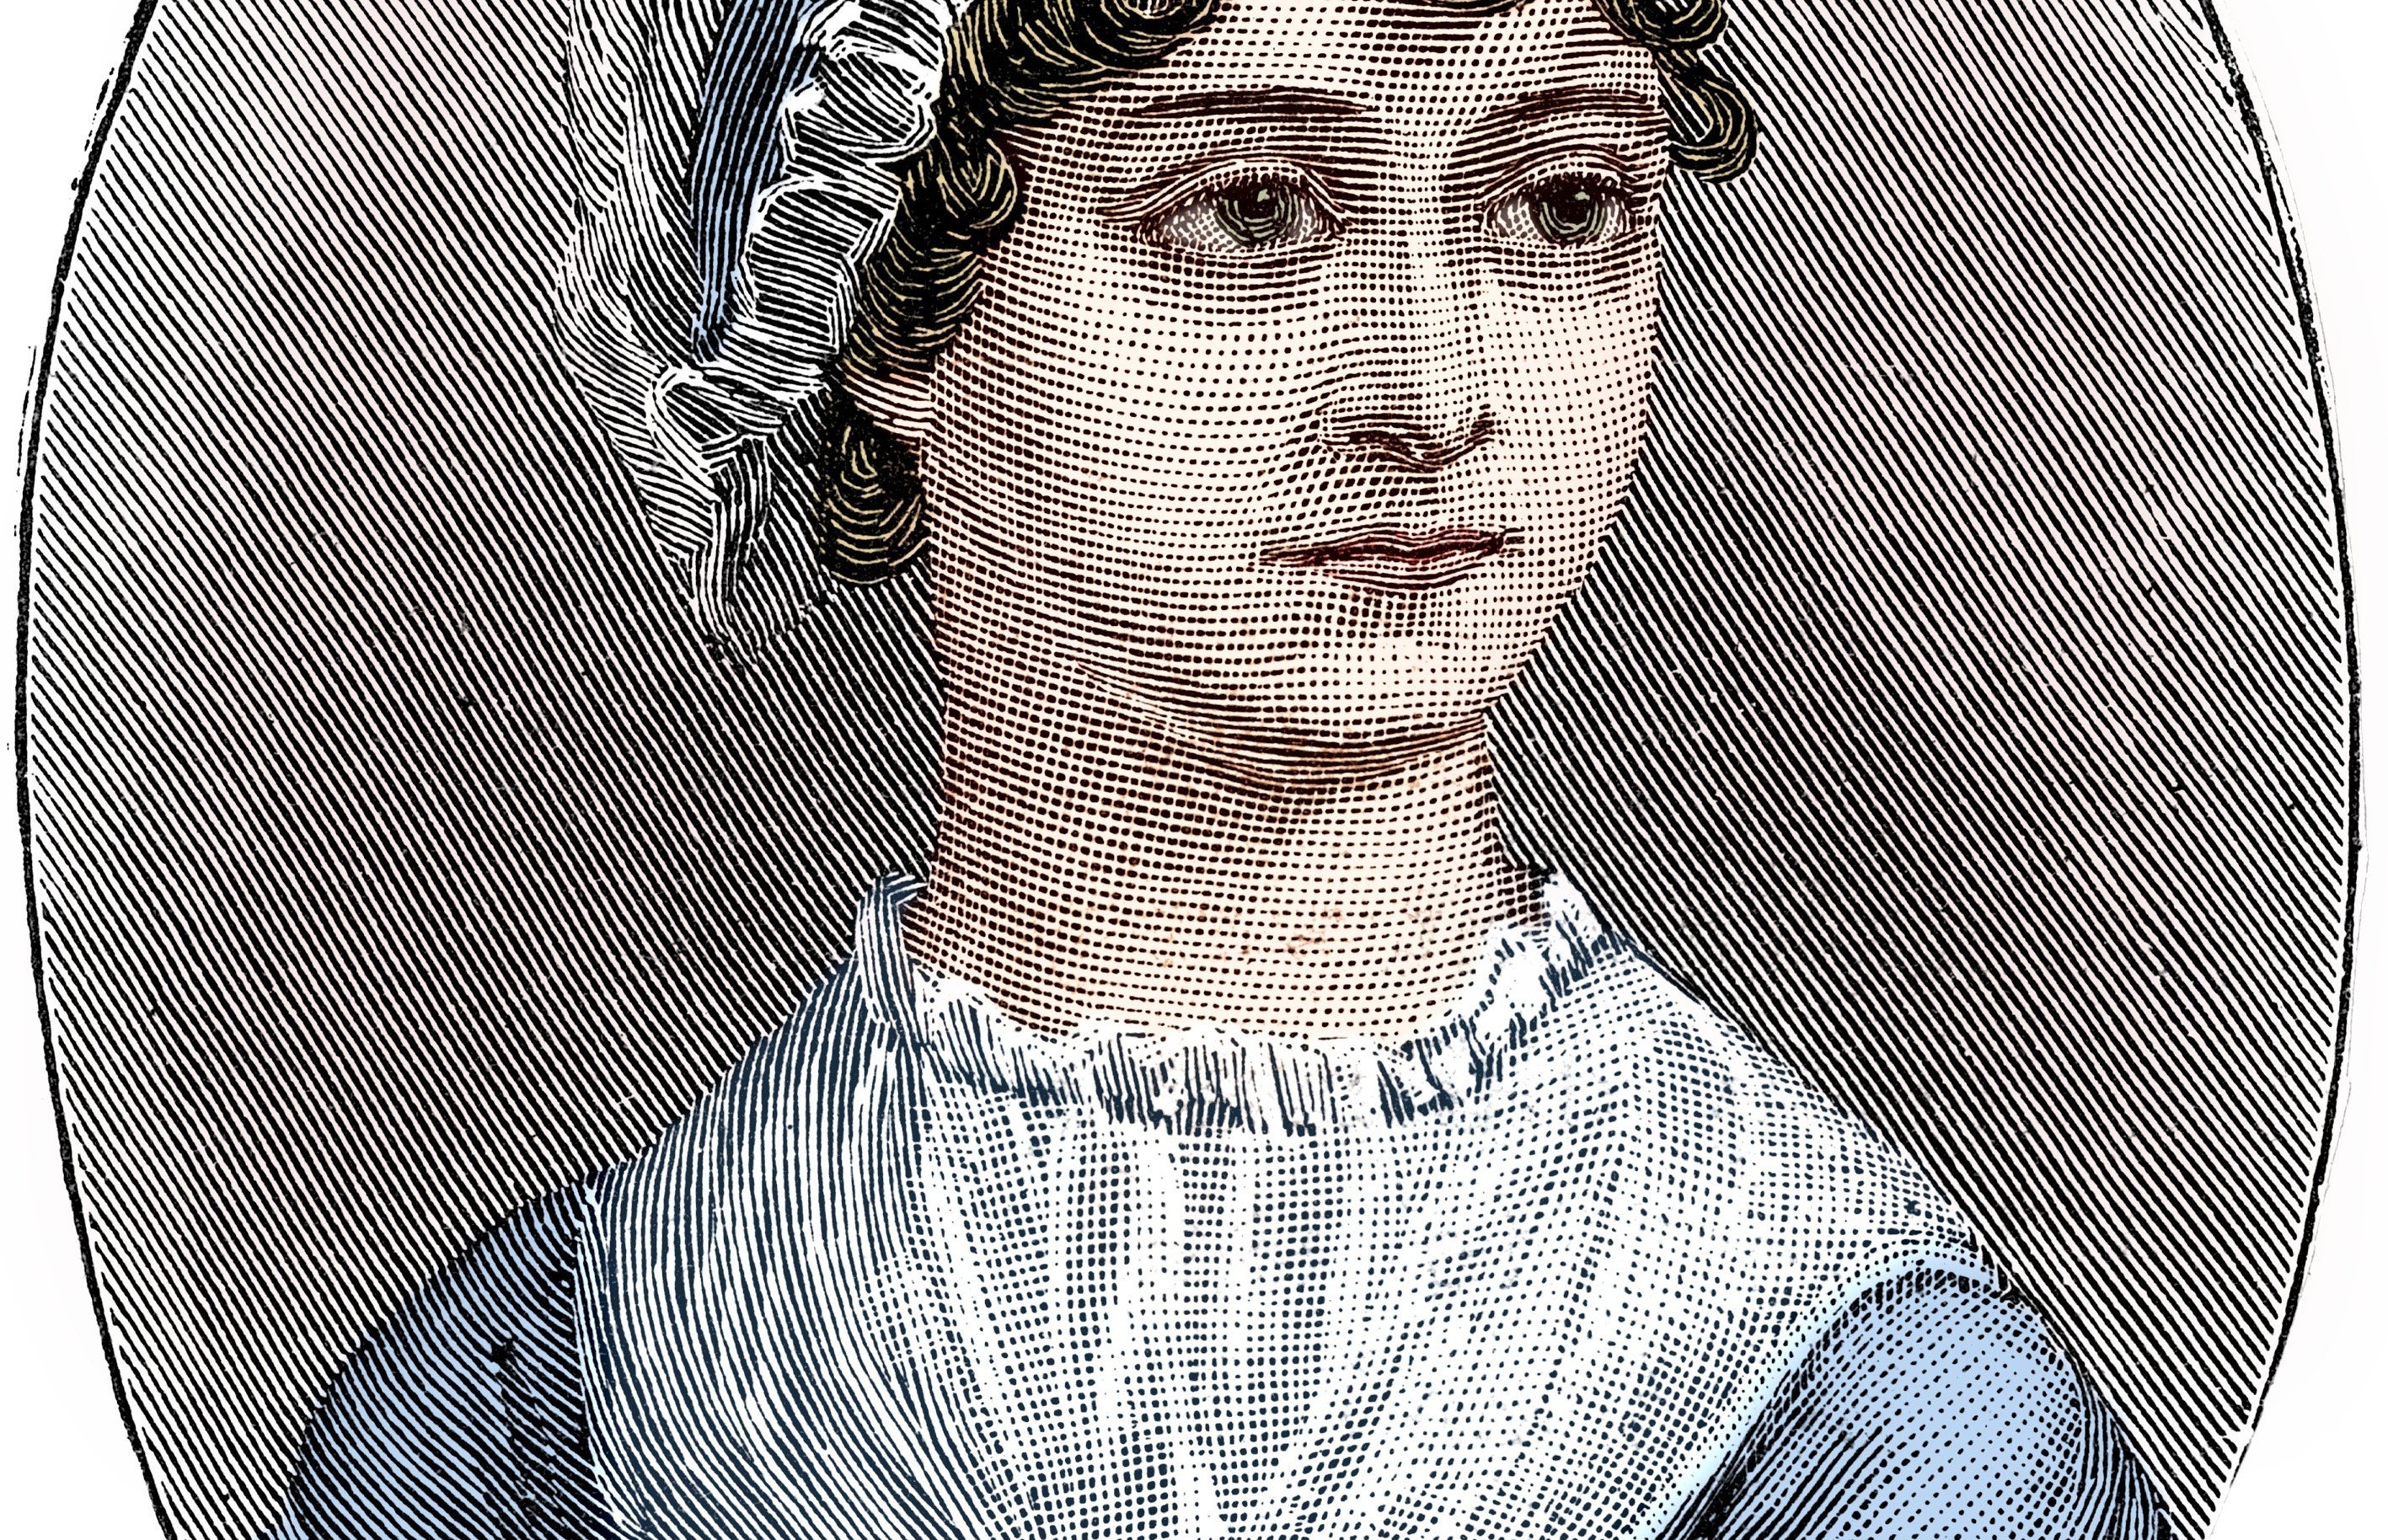 A drawing of author Jane Austen